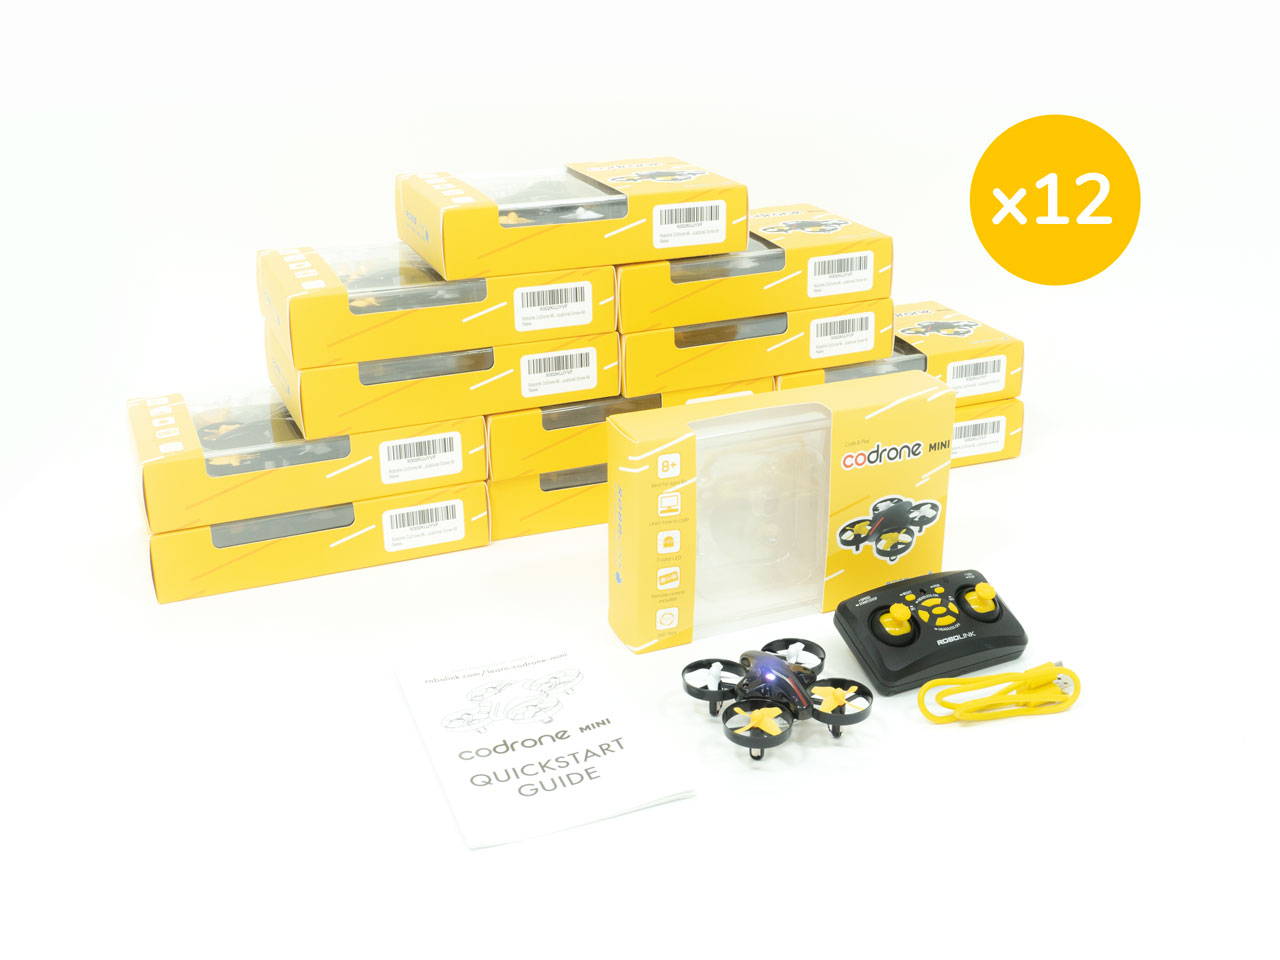 CoDrone Mini classroom set of 12 kits, programmable with Python and Blockly